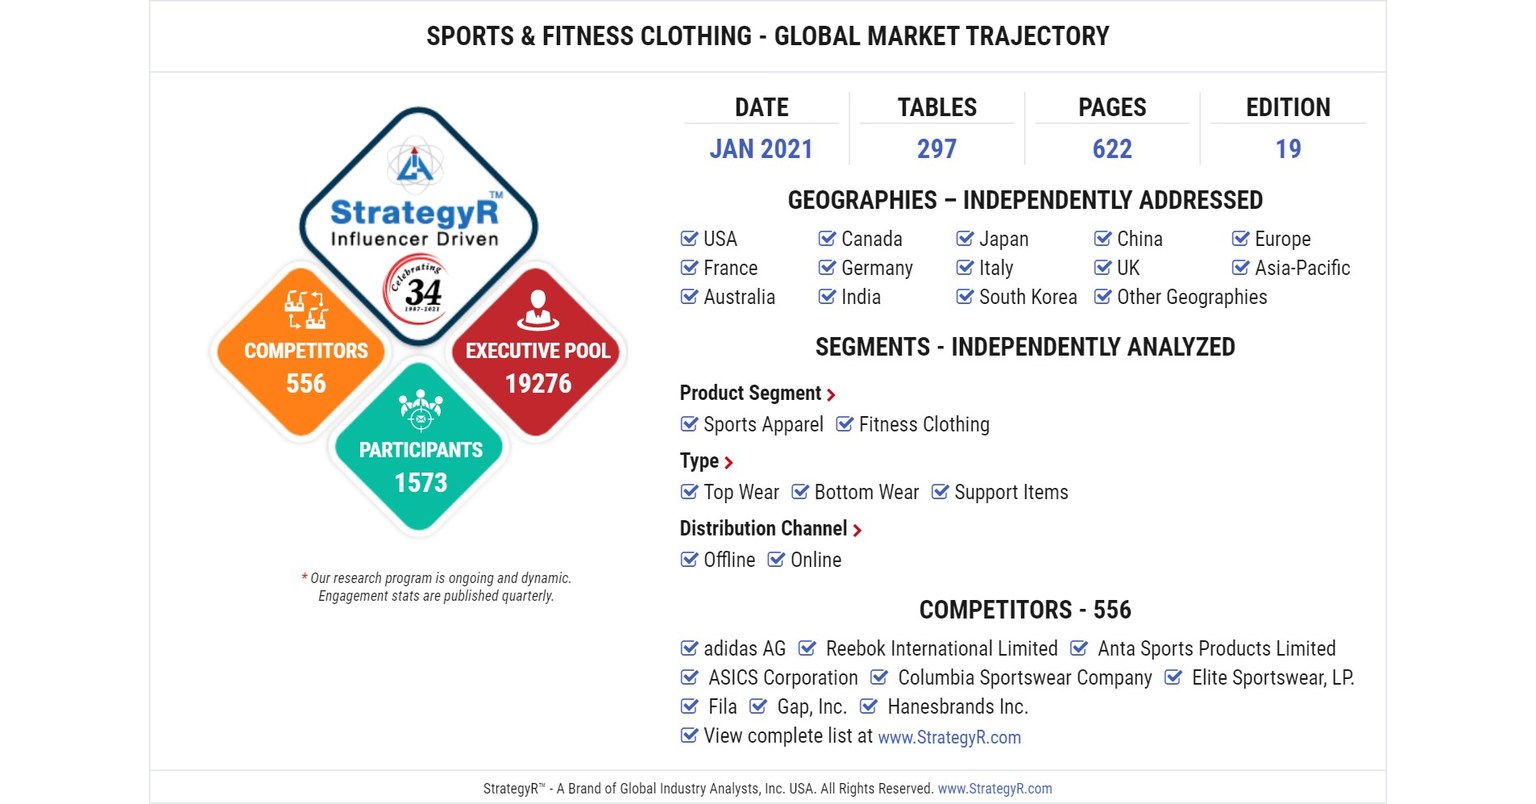 Global Sports & Fitness Clothing Market to Reach $221.3 Billion by